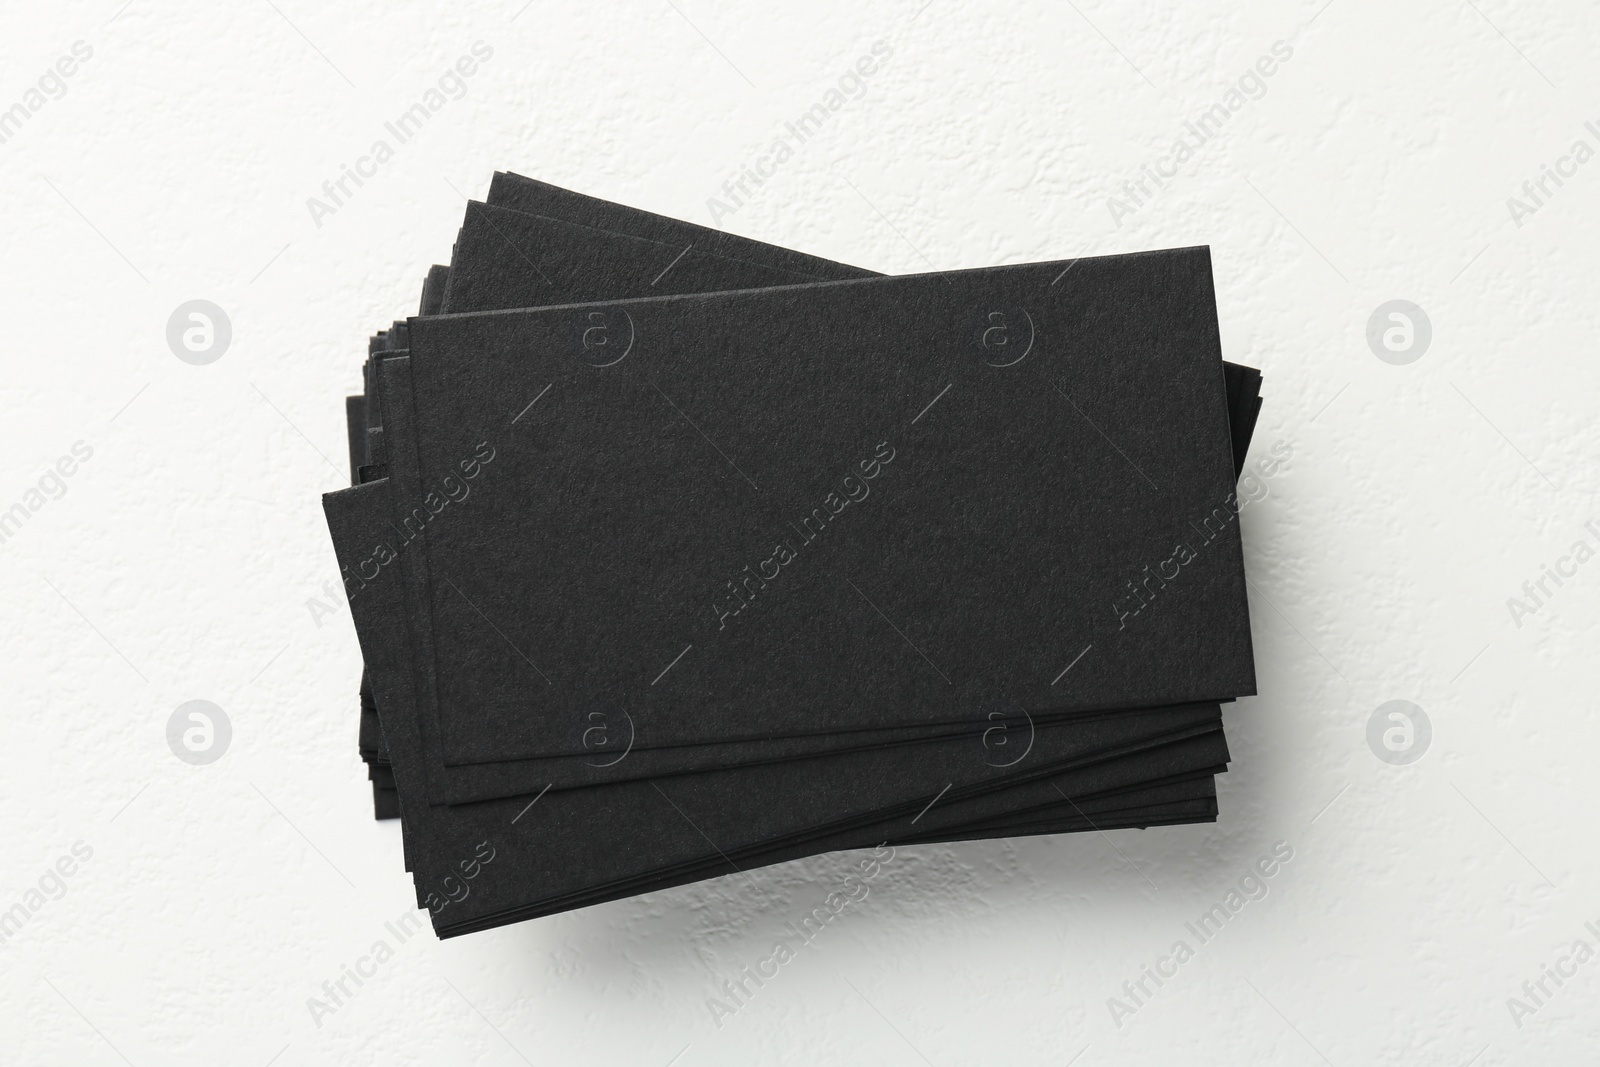 Photo of Blank black business cards on white table, top view